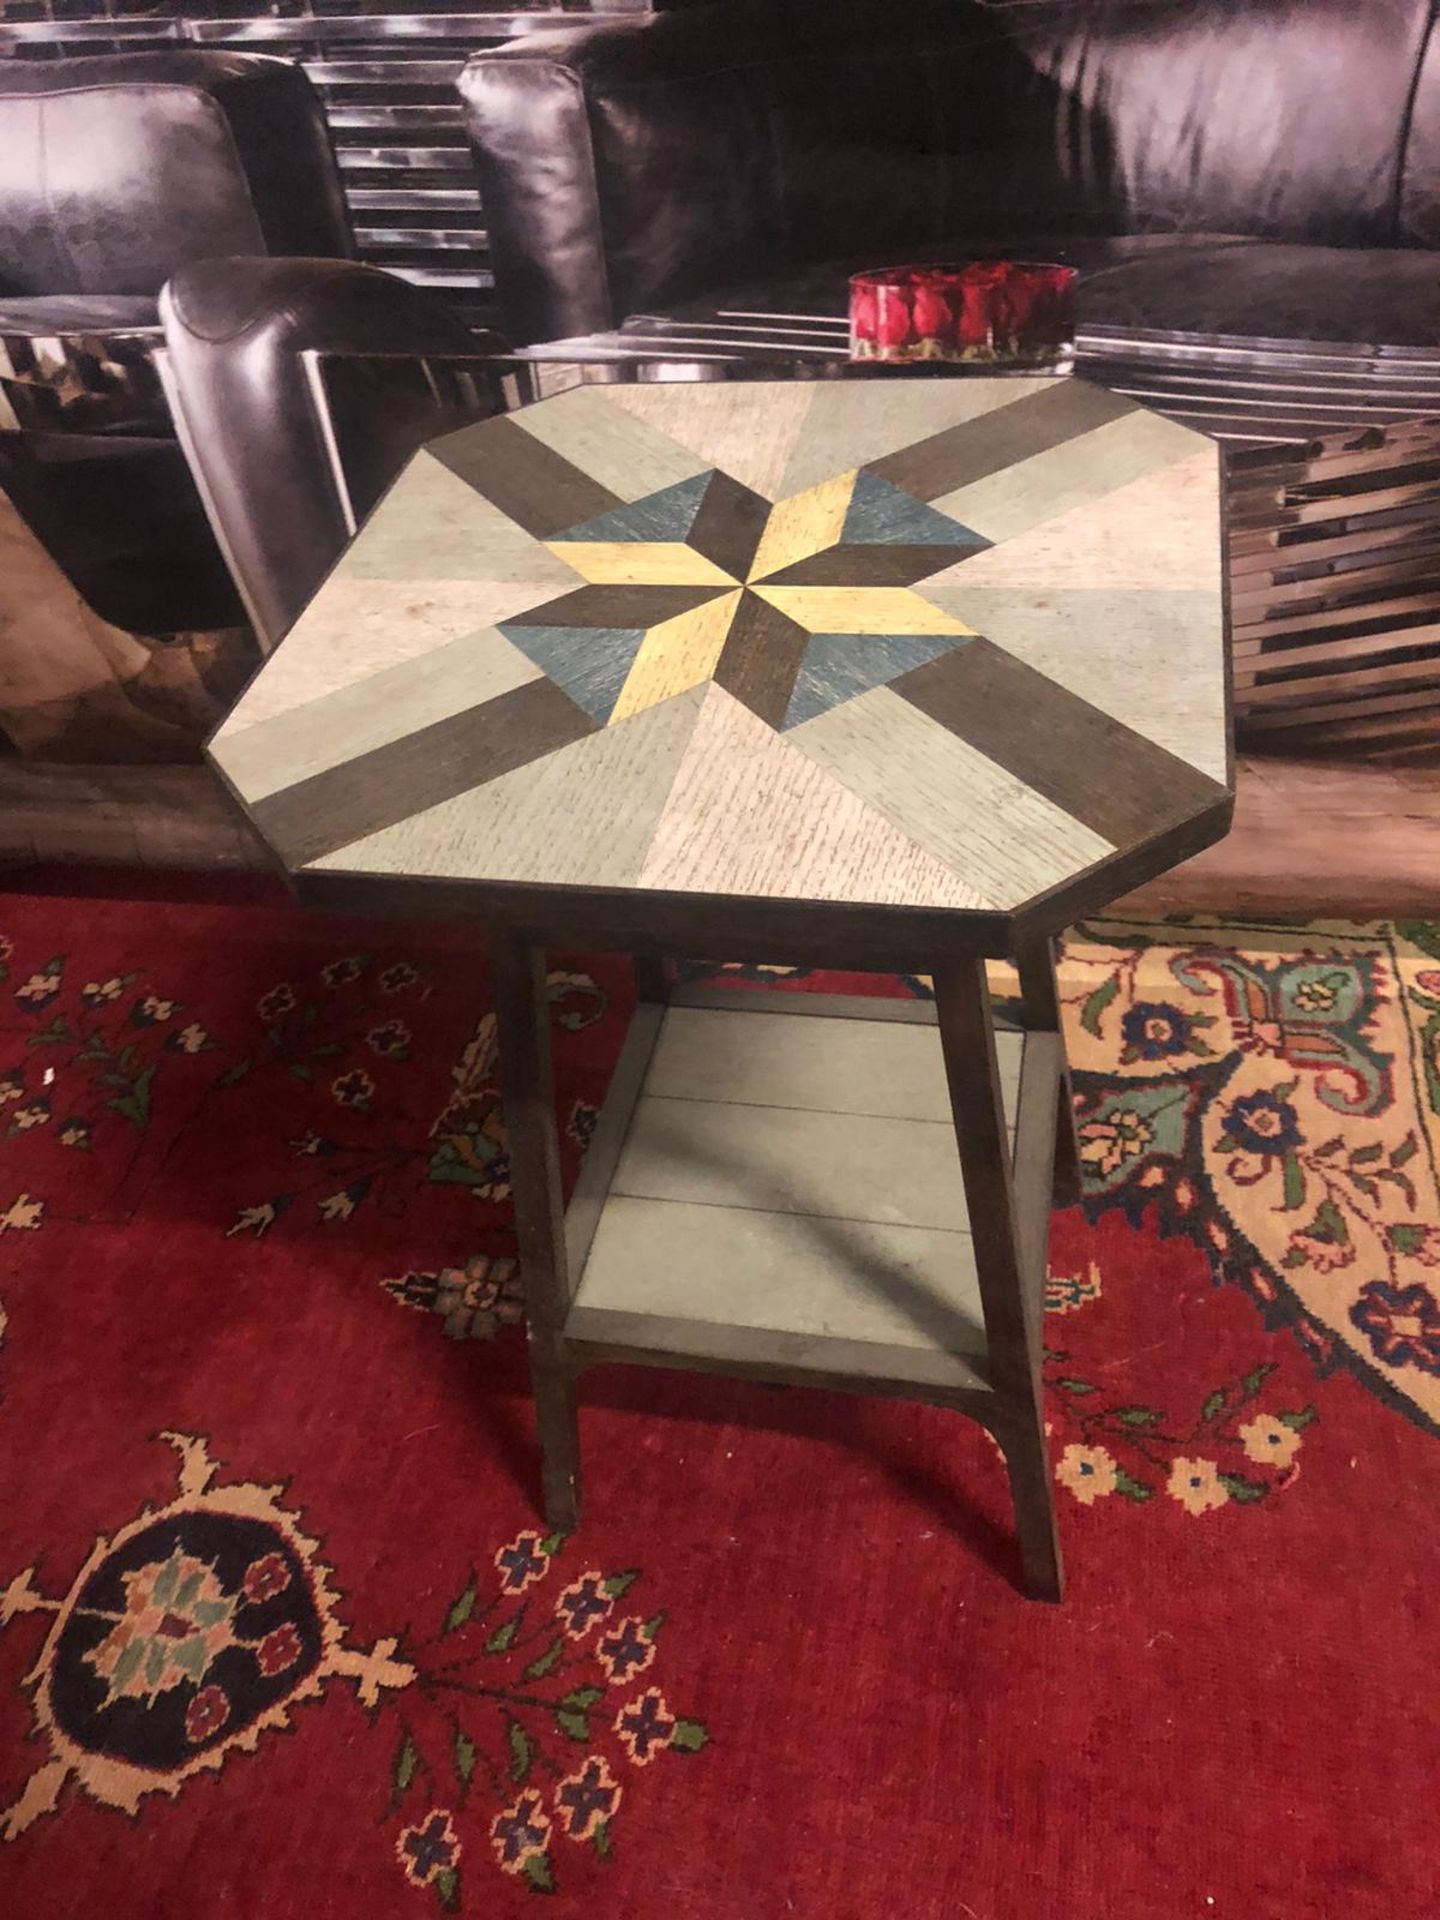 Geometric Top Side Table With Undershelf Works Great As A Lamp TableÃƒâ€š From Sideshow To Show- - Image 5 of 6